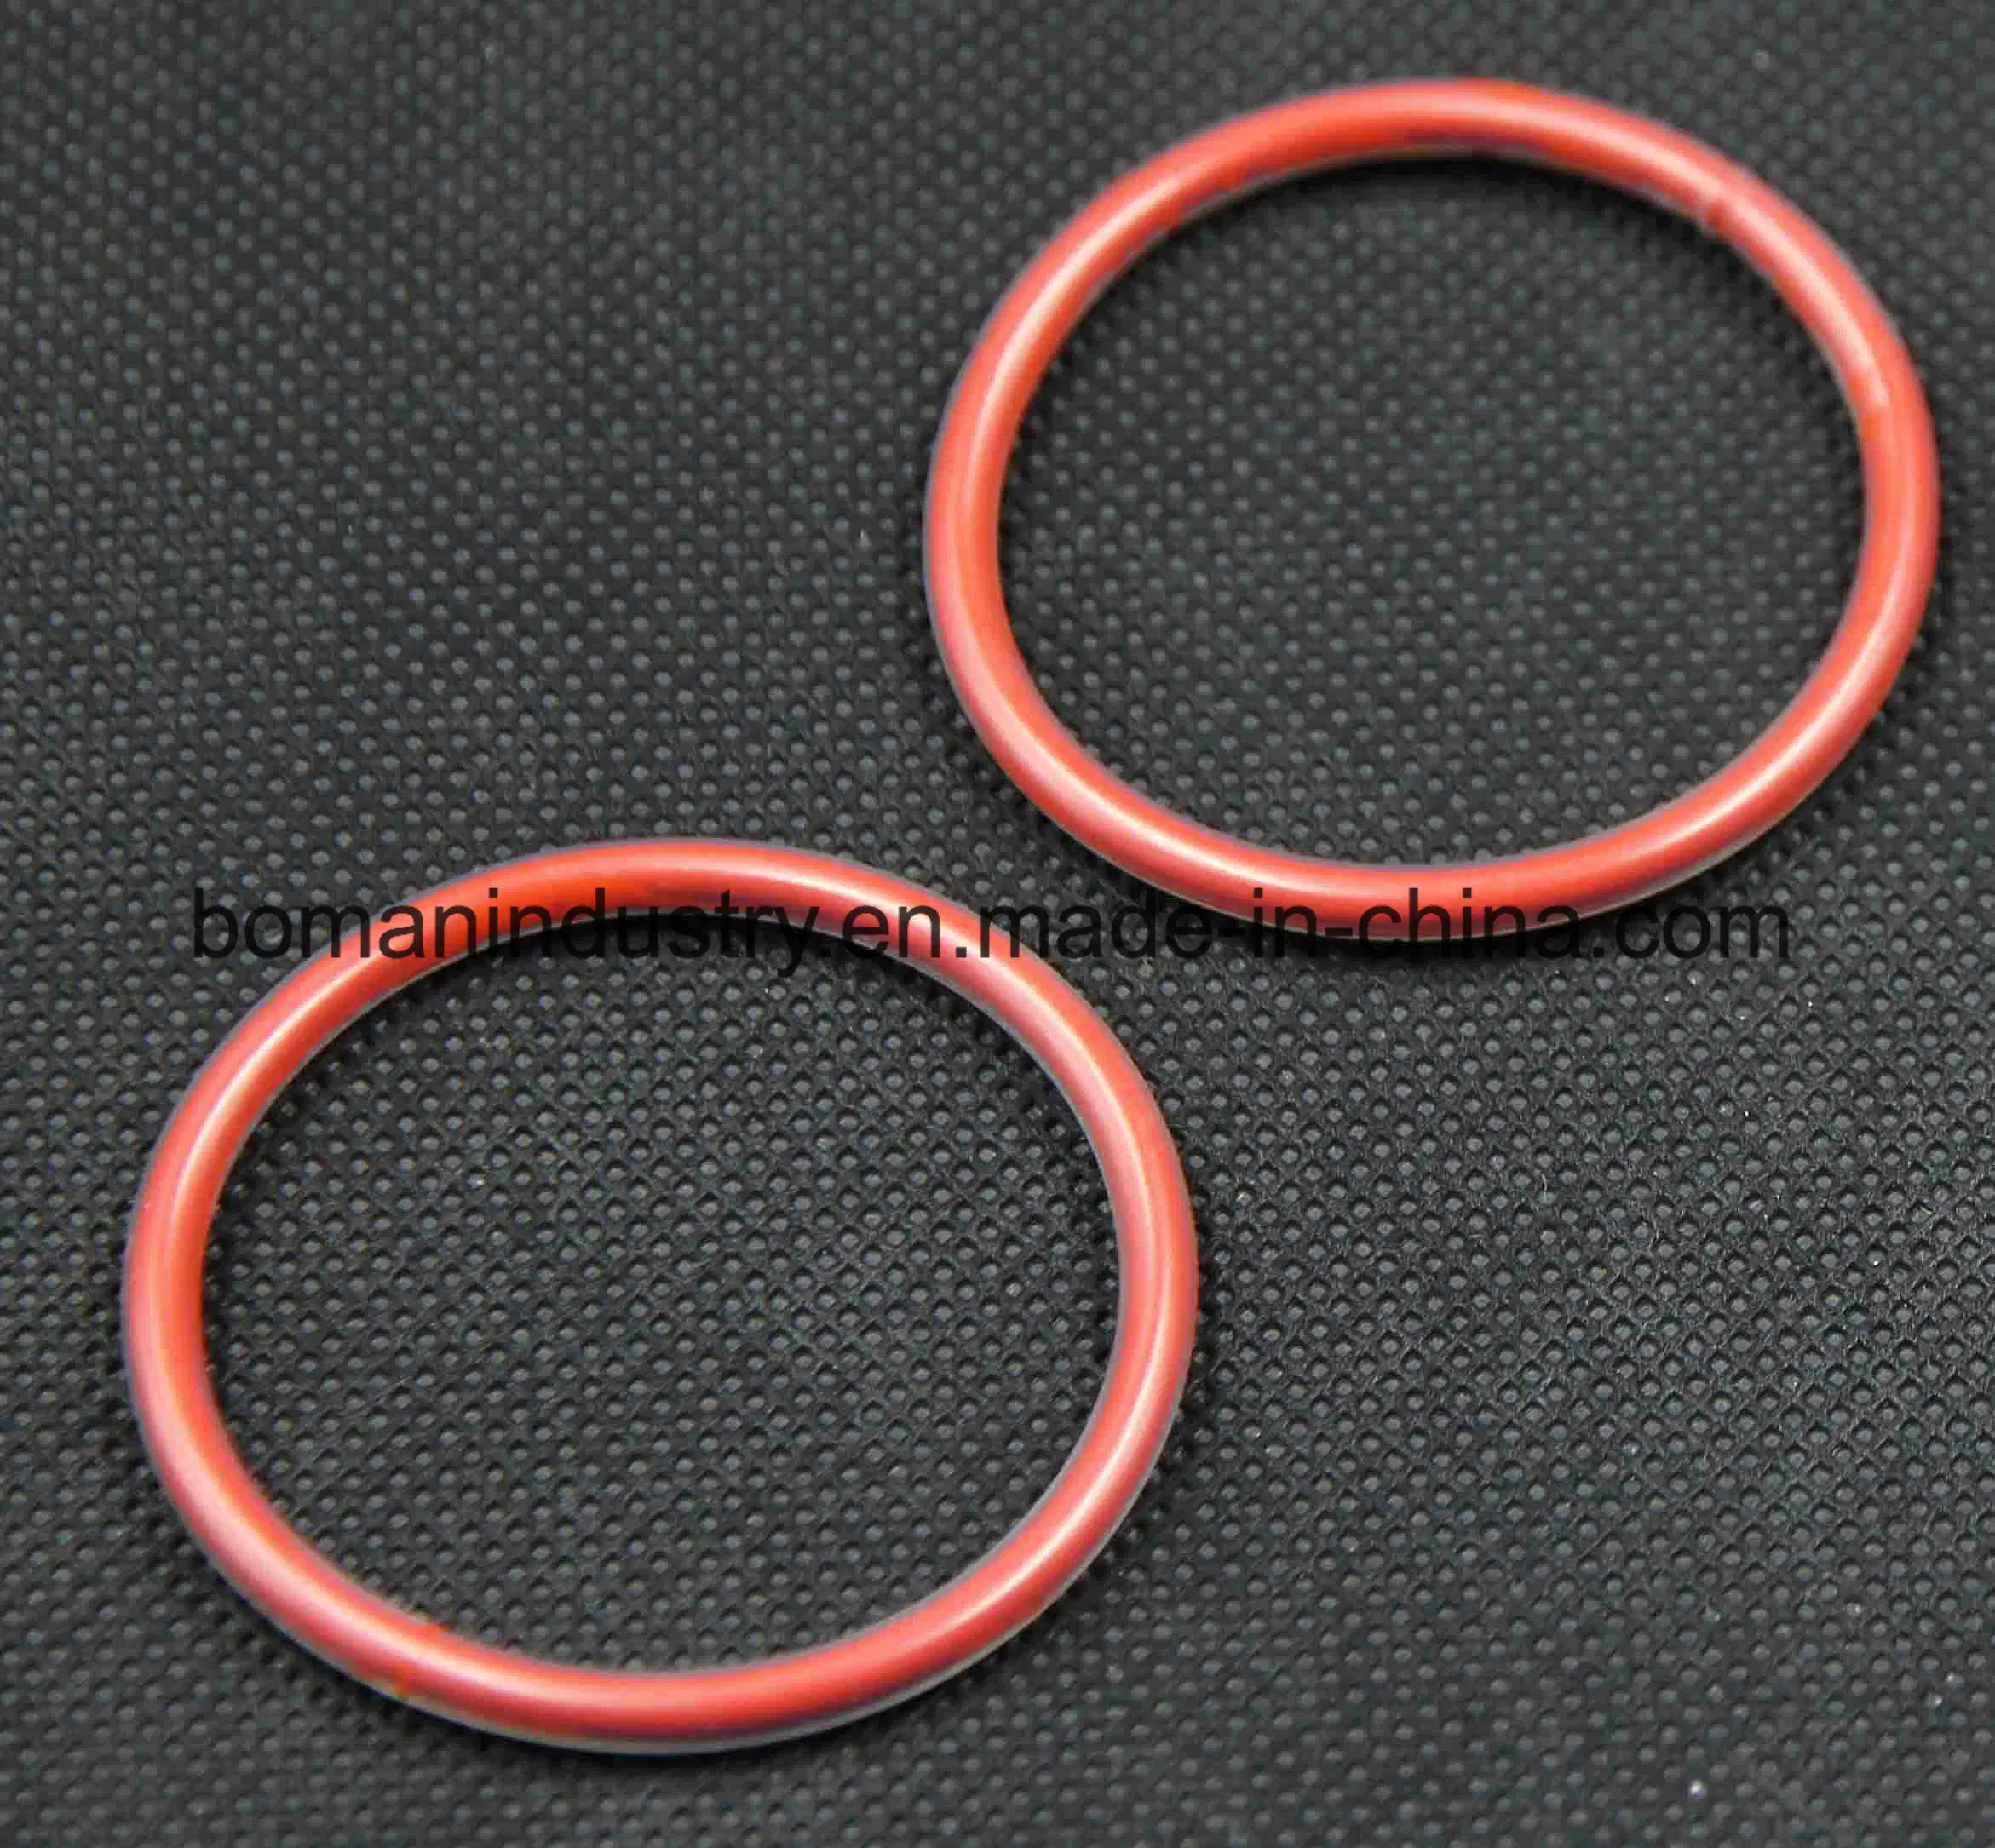 EPDM Rubber O Ring for Auto Part